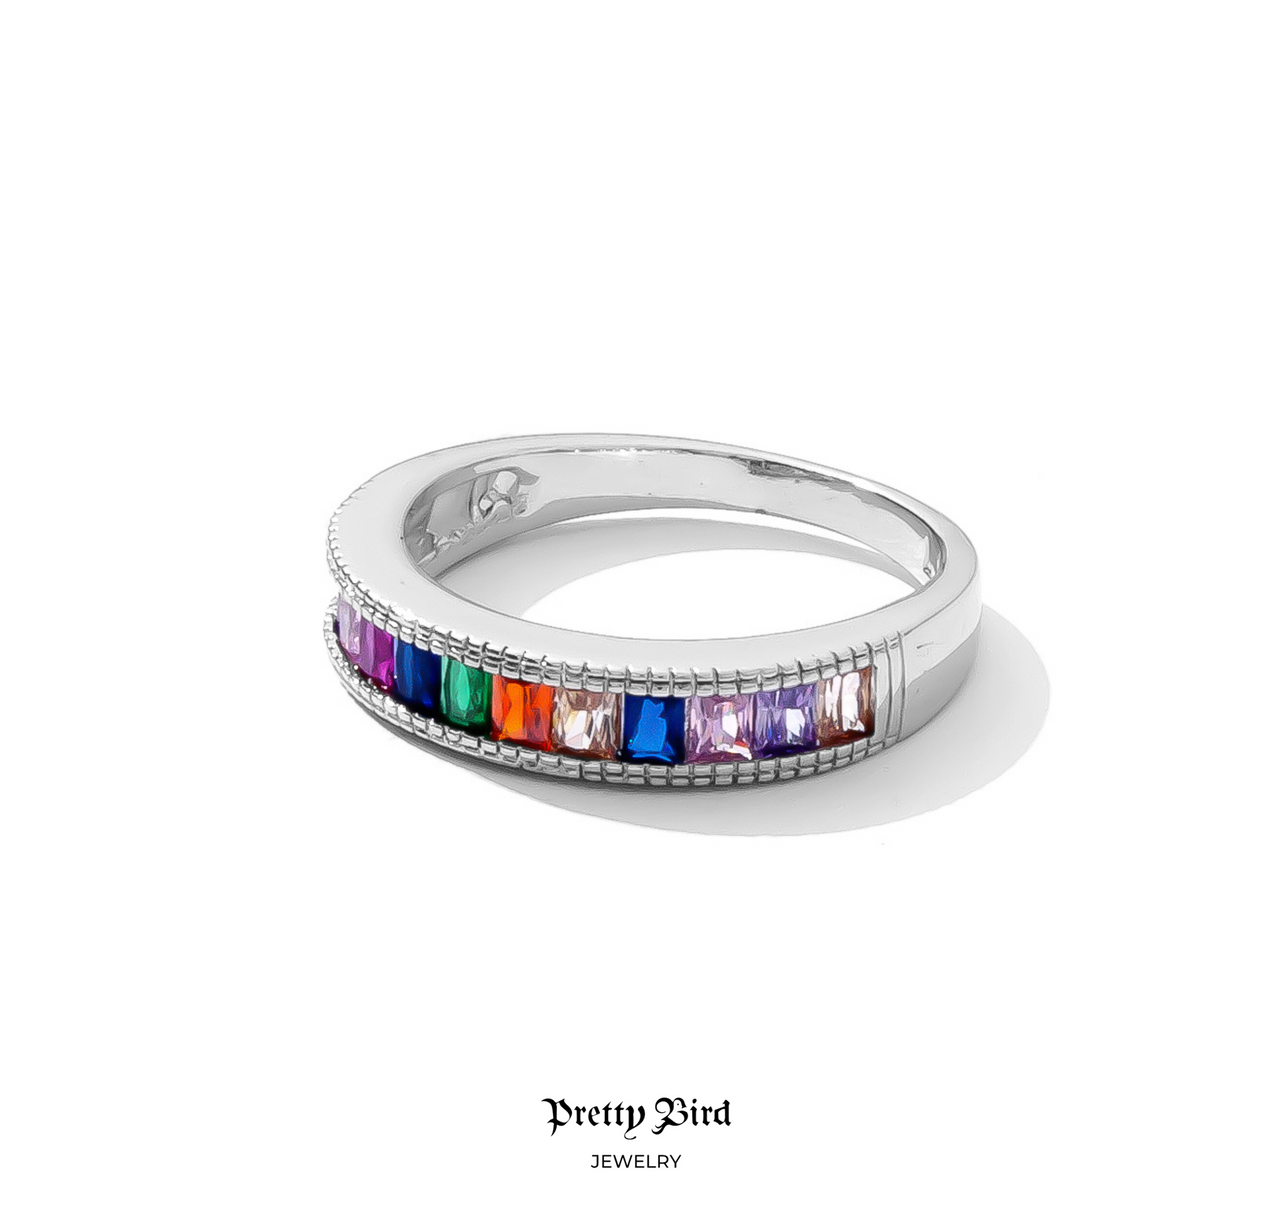 Colored Baguette Half Eternity Band Ring